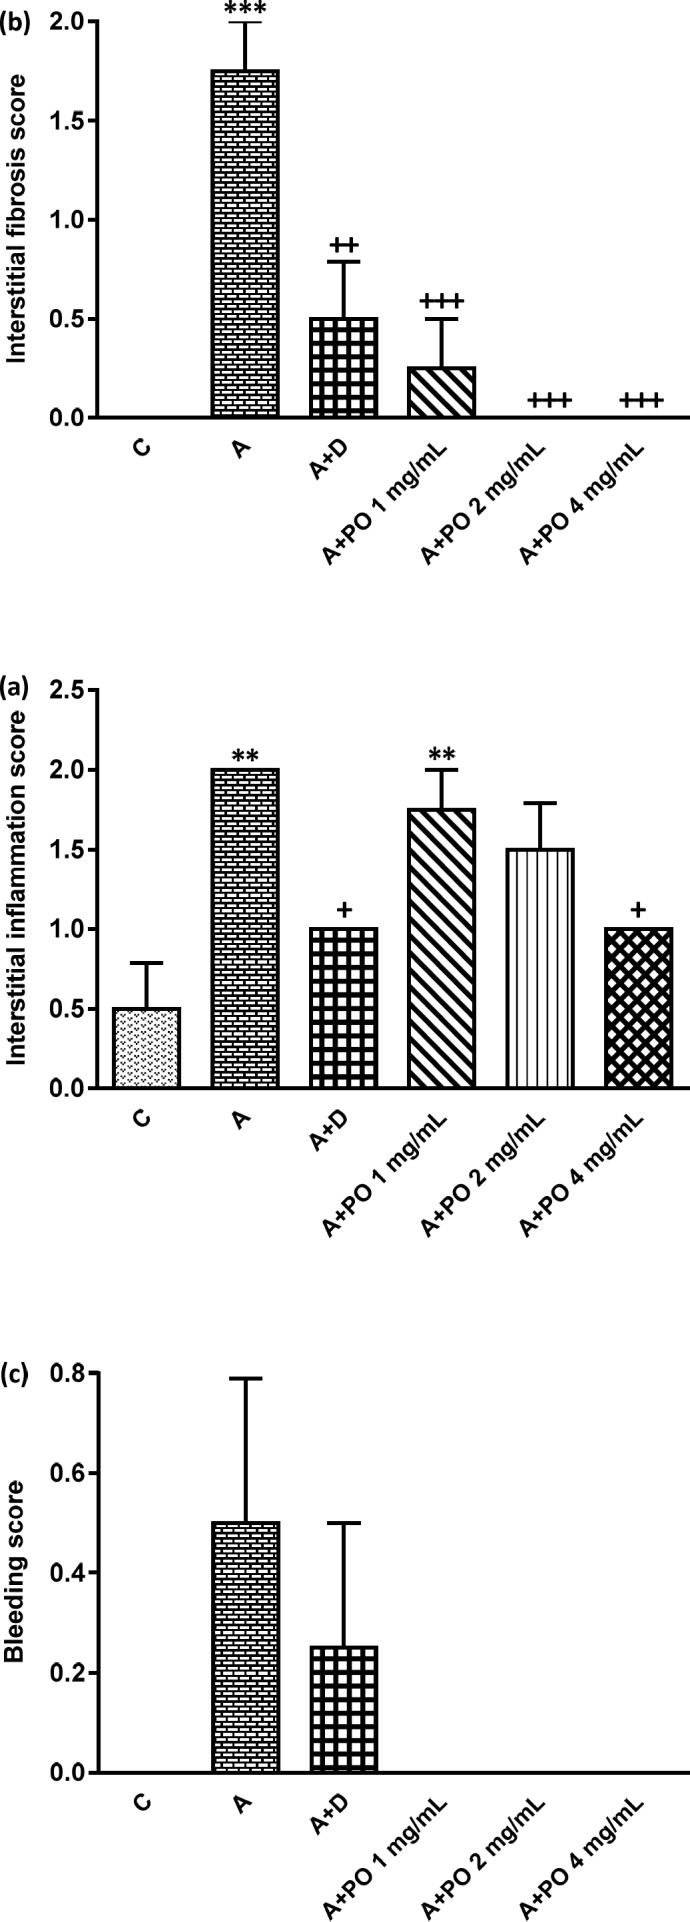 Interstitial inﬂammation (a), interstitial fibrosis (b) and bleeding (c) scores in control (C), asthma (A), asthmatic rats treated with dexamethasone (A+D) and asthmatic rats treated with P. oleracea (PO 1, 2 and 4 mg/mL) (n = 8 in each group). Data are expressed as mean ± SEM values. ** p < 0.01 and *** p < 0.001 show significant differences compared to group C. + p < 0.05, ++ p < 0.01 and +++ p < 0.001 show significant differences compared to group A. Statistical analyses were performed using ANOVA with Tukey-Kramer’s post-test